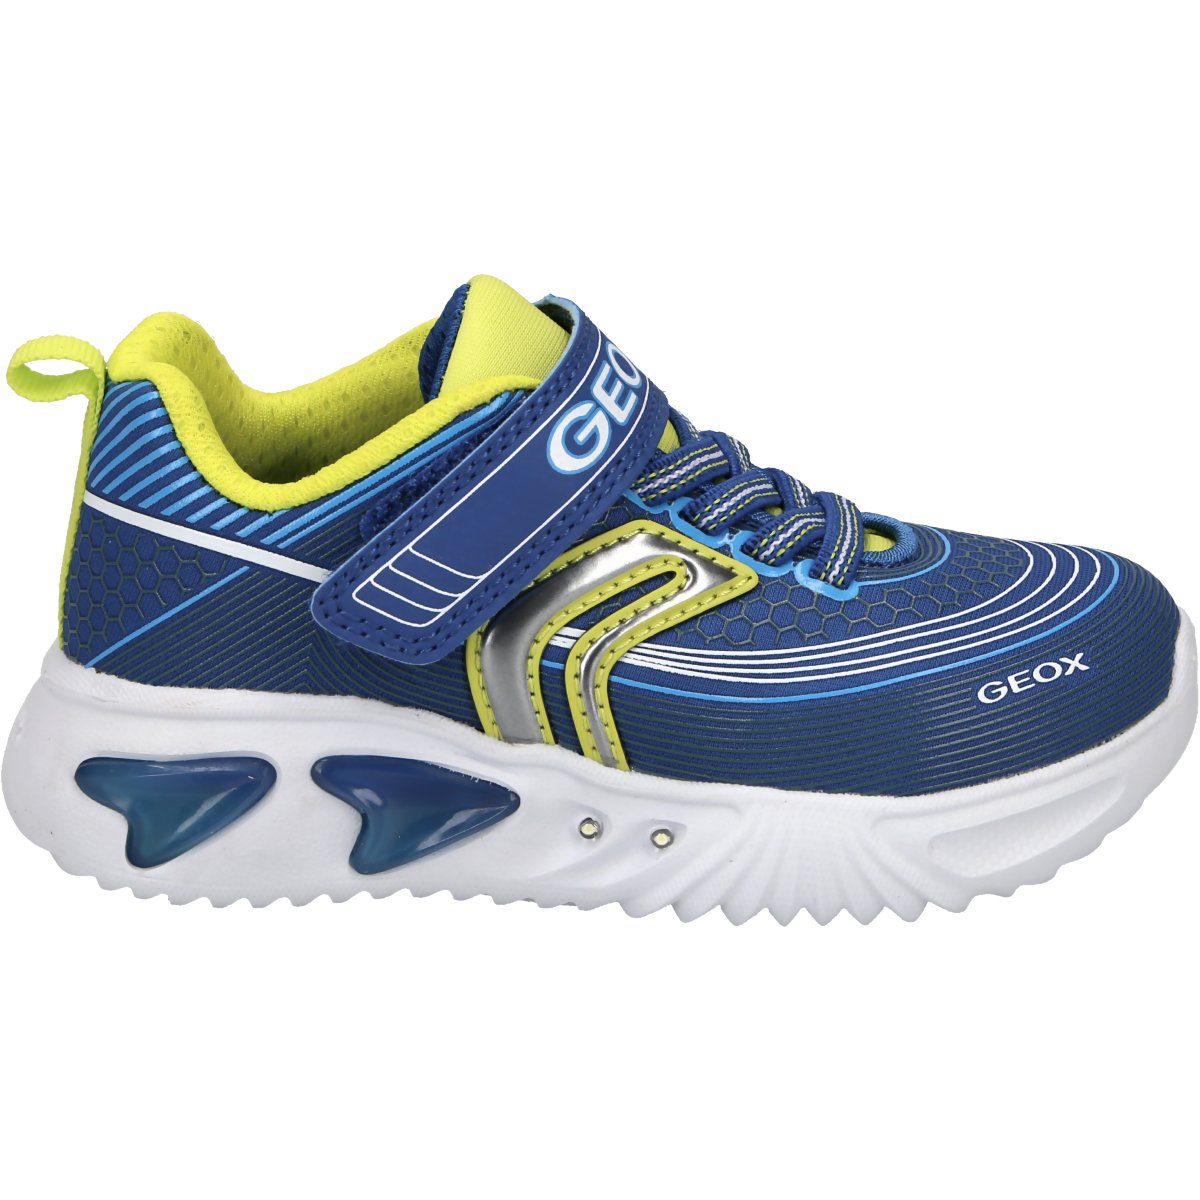 Sneaker ASSISTER Geox ROYAL/LIME